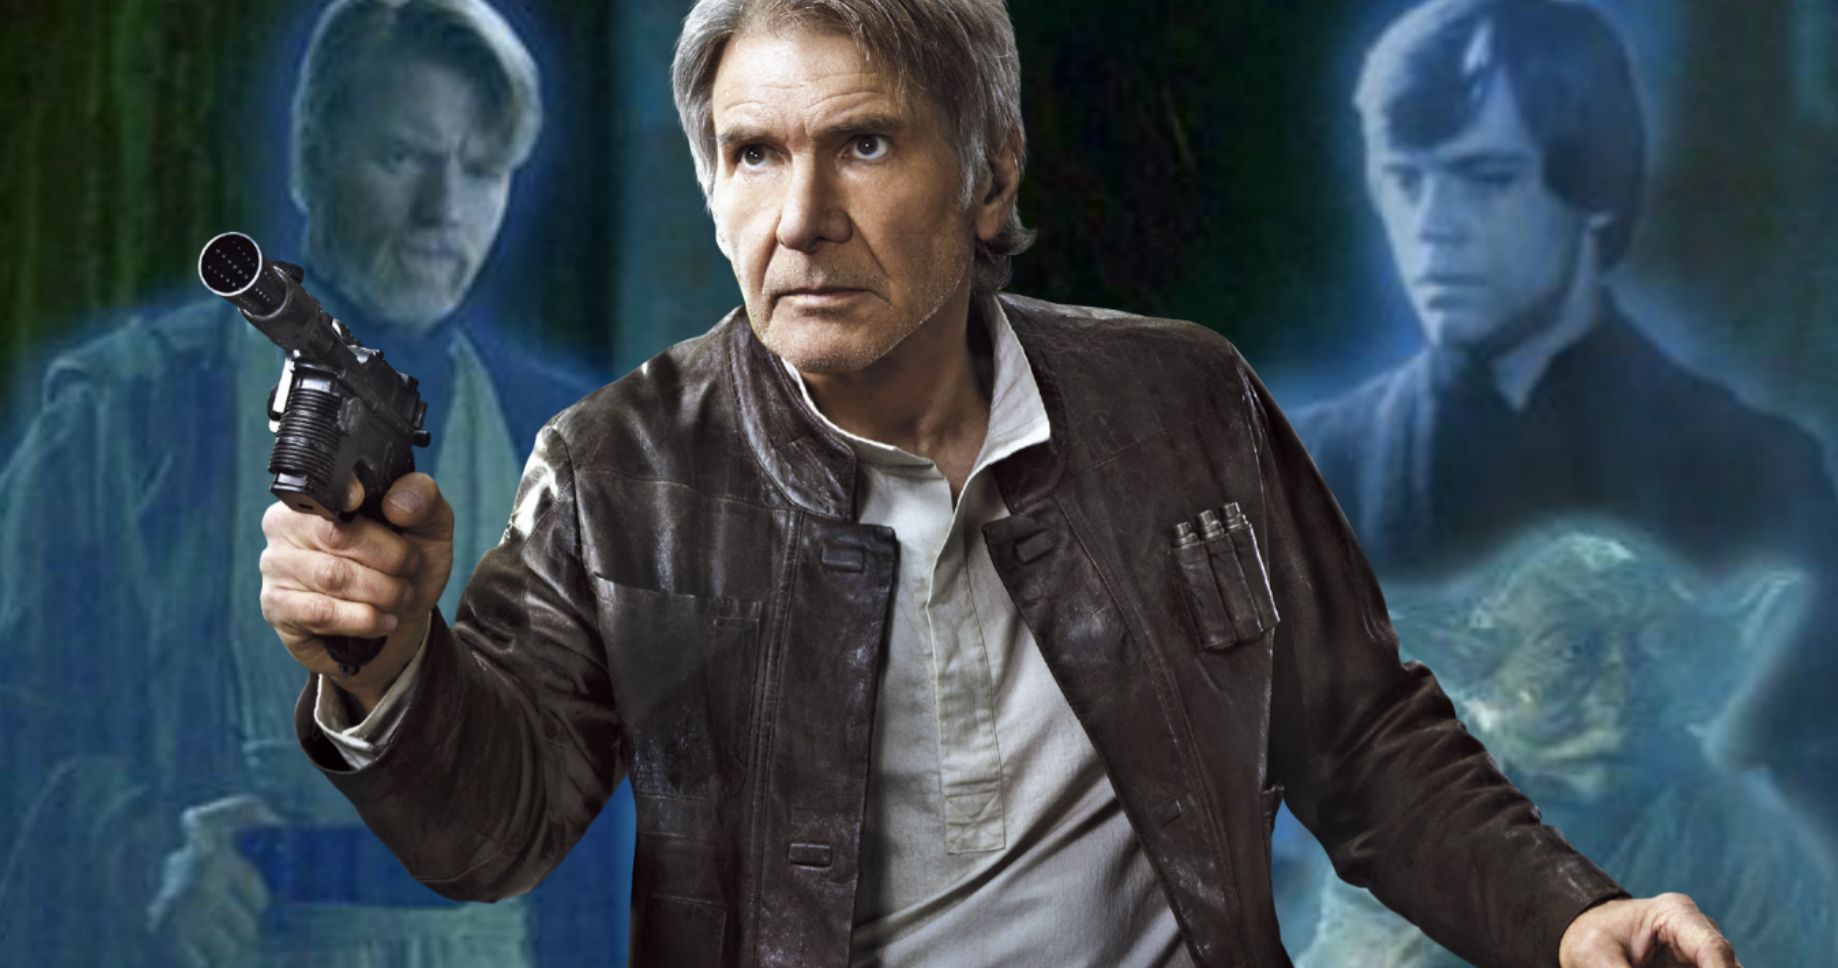 Harrison Ford Has No Idea What a Force Ghost Is and He Doesn't Care